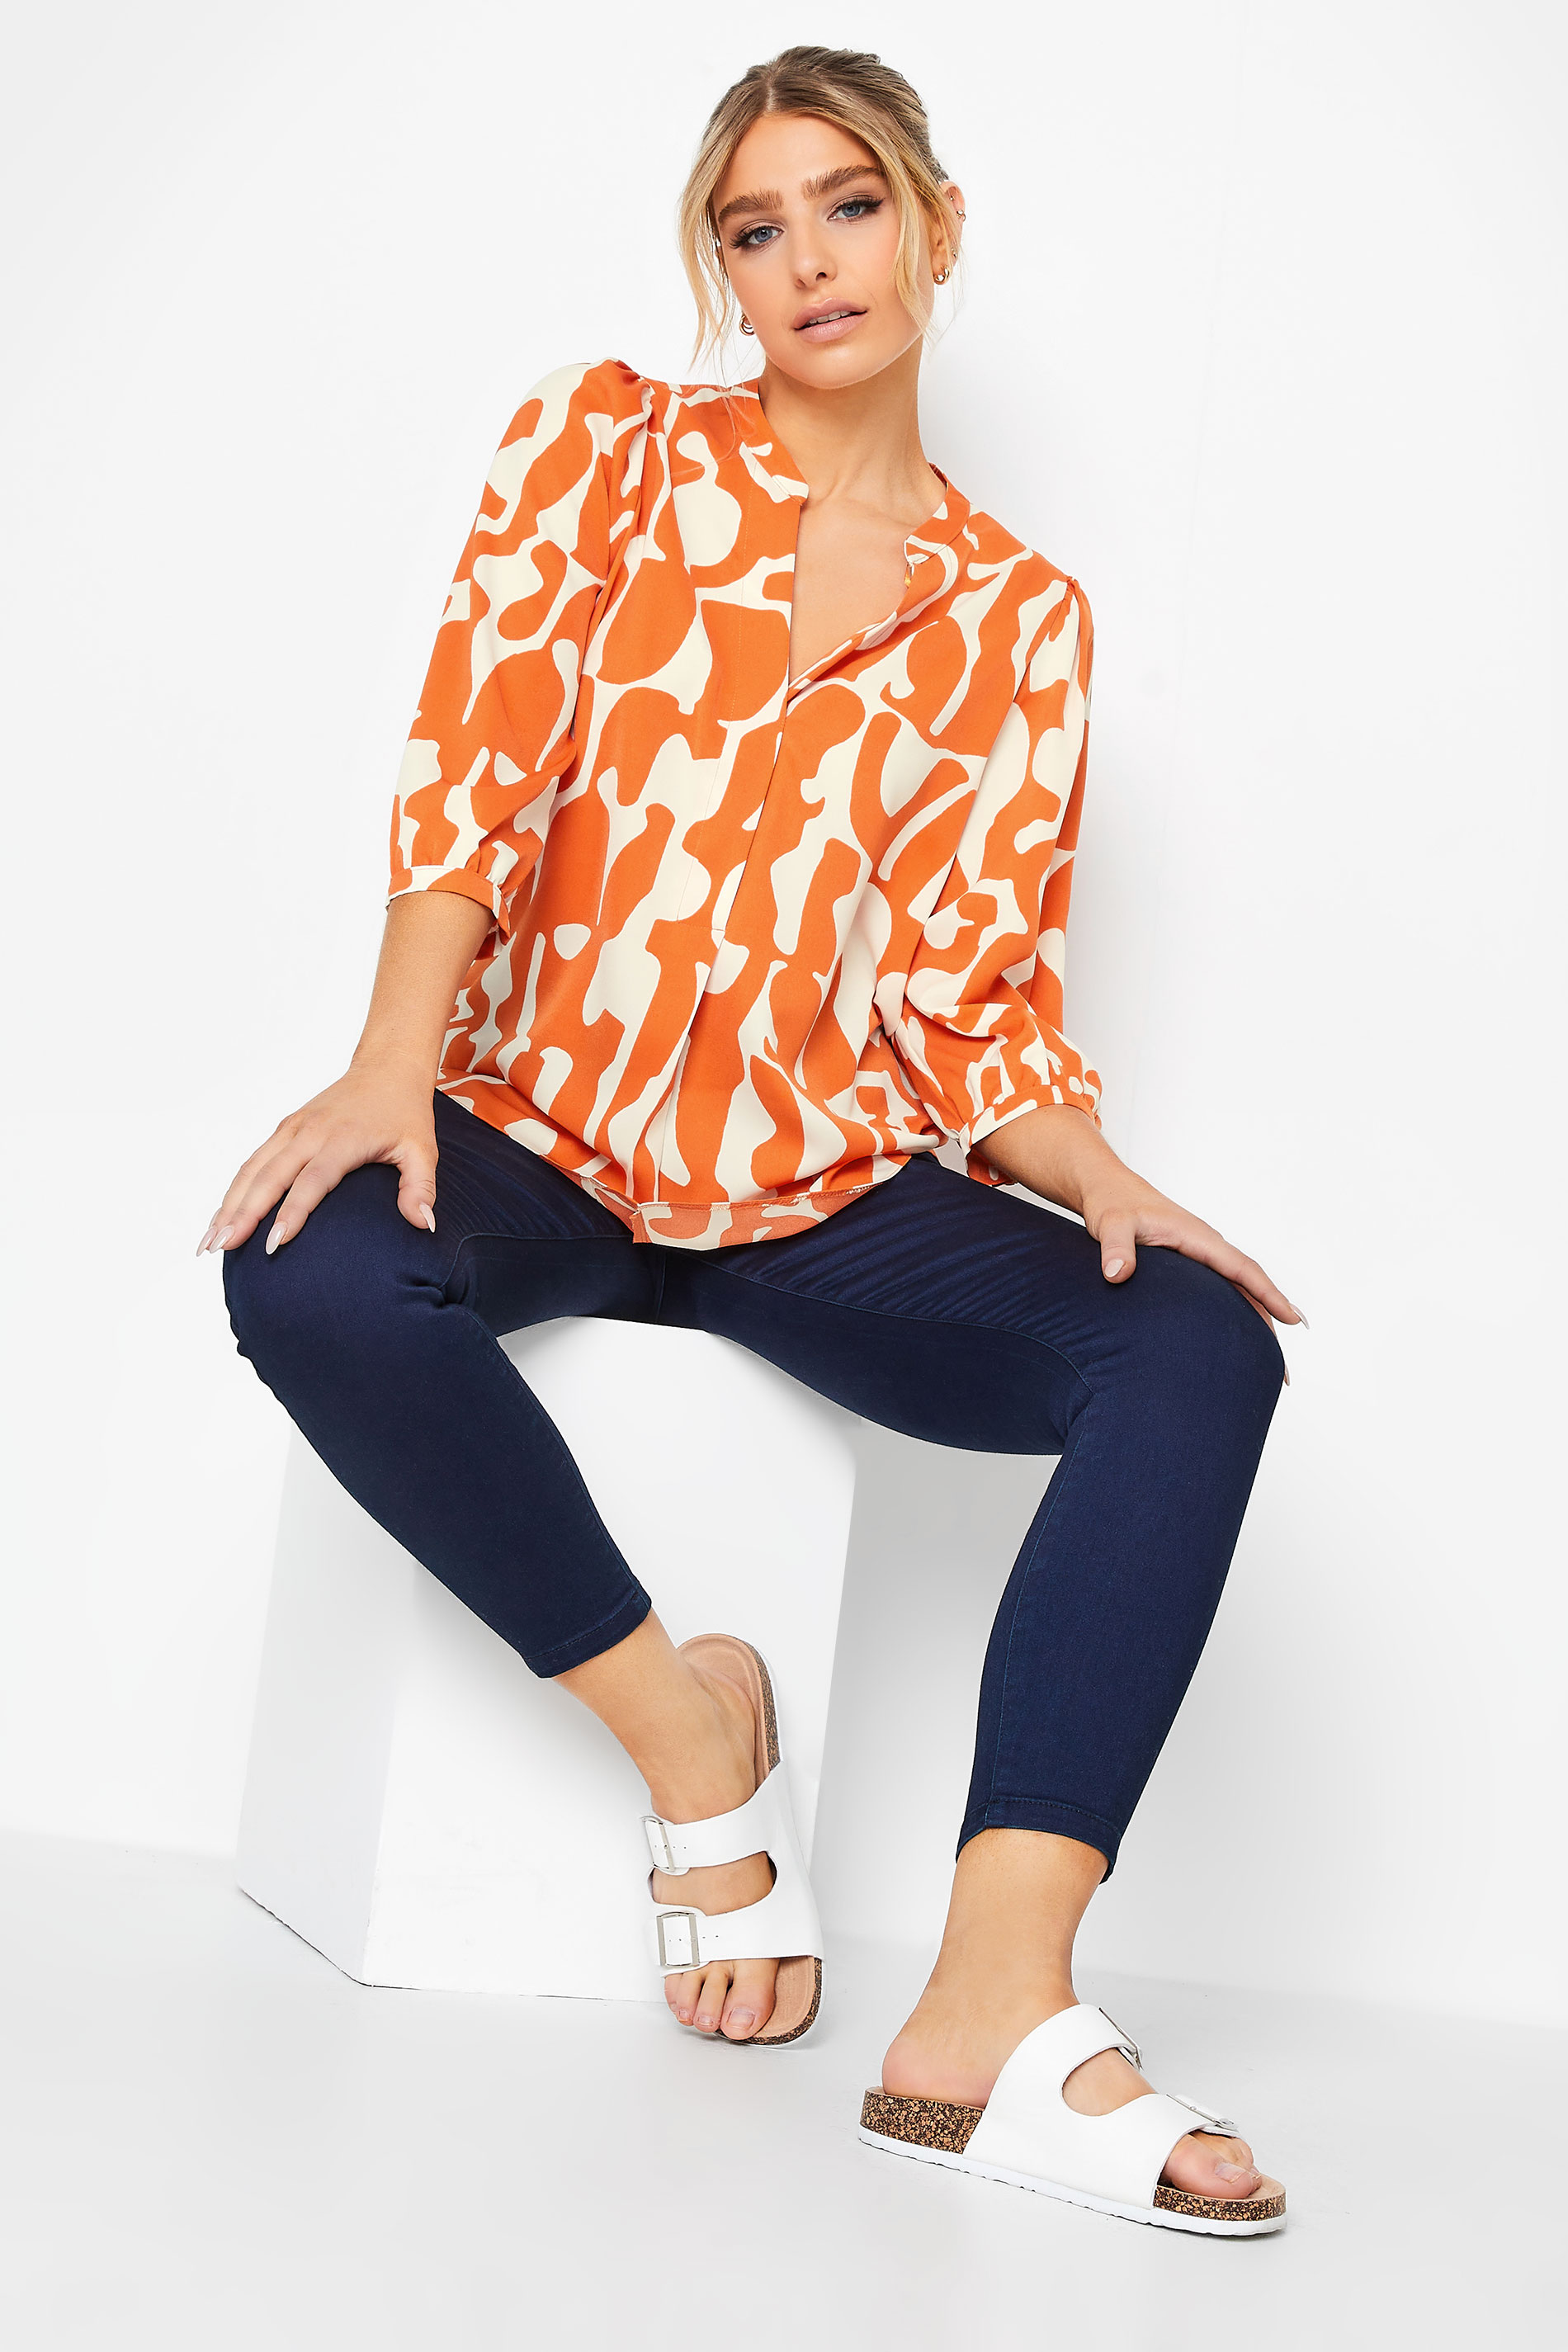 M&Co Orange Abstract Print 3/4 Sleeve Blouse | M&Co